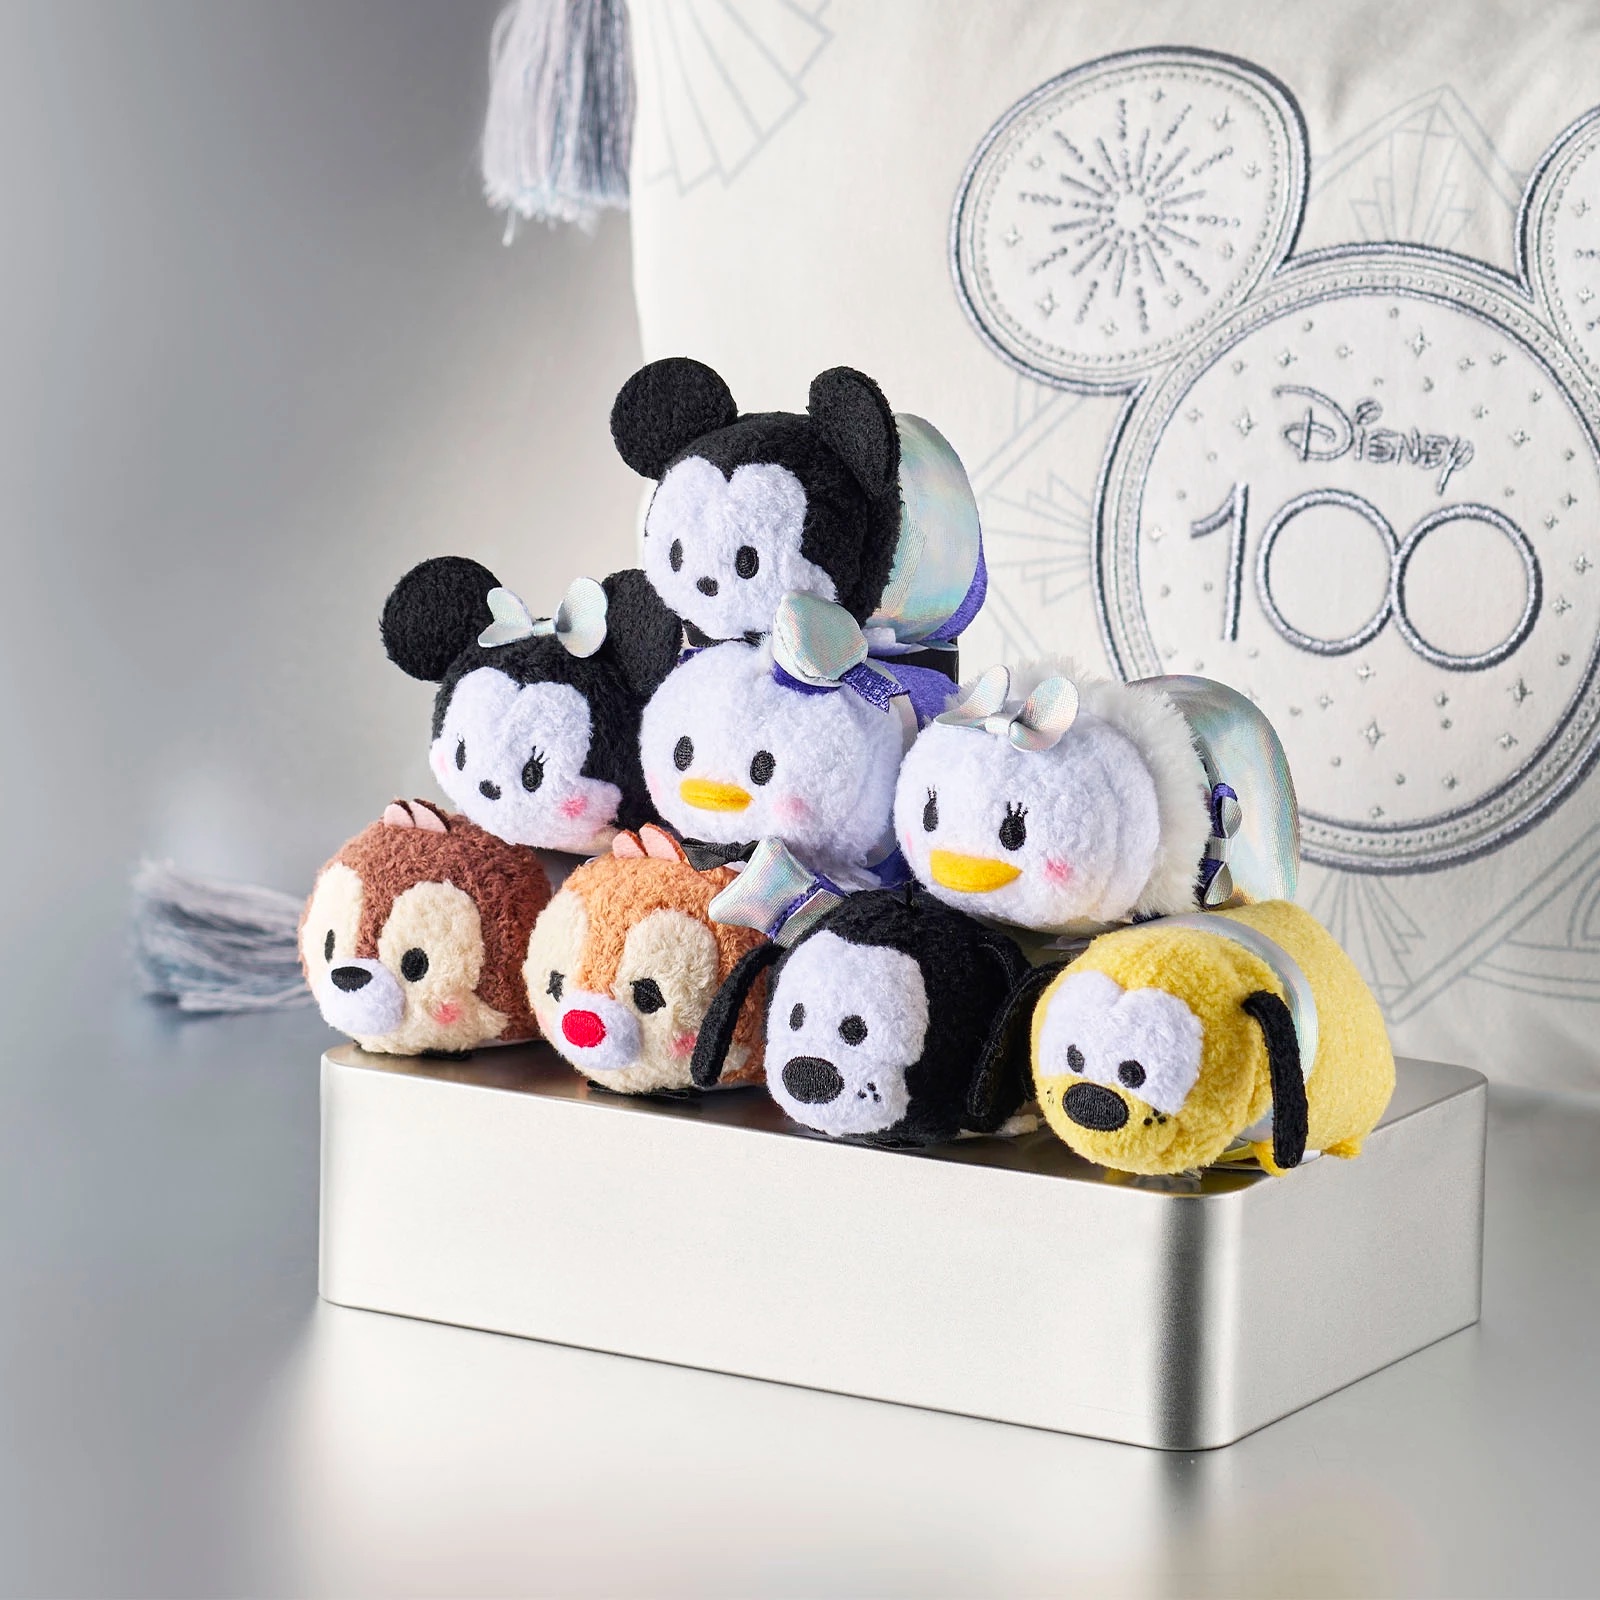 Disney Tsum Tsum Characters Come Alive on Your Nails – Magical Getaway Blog